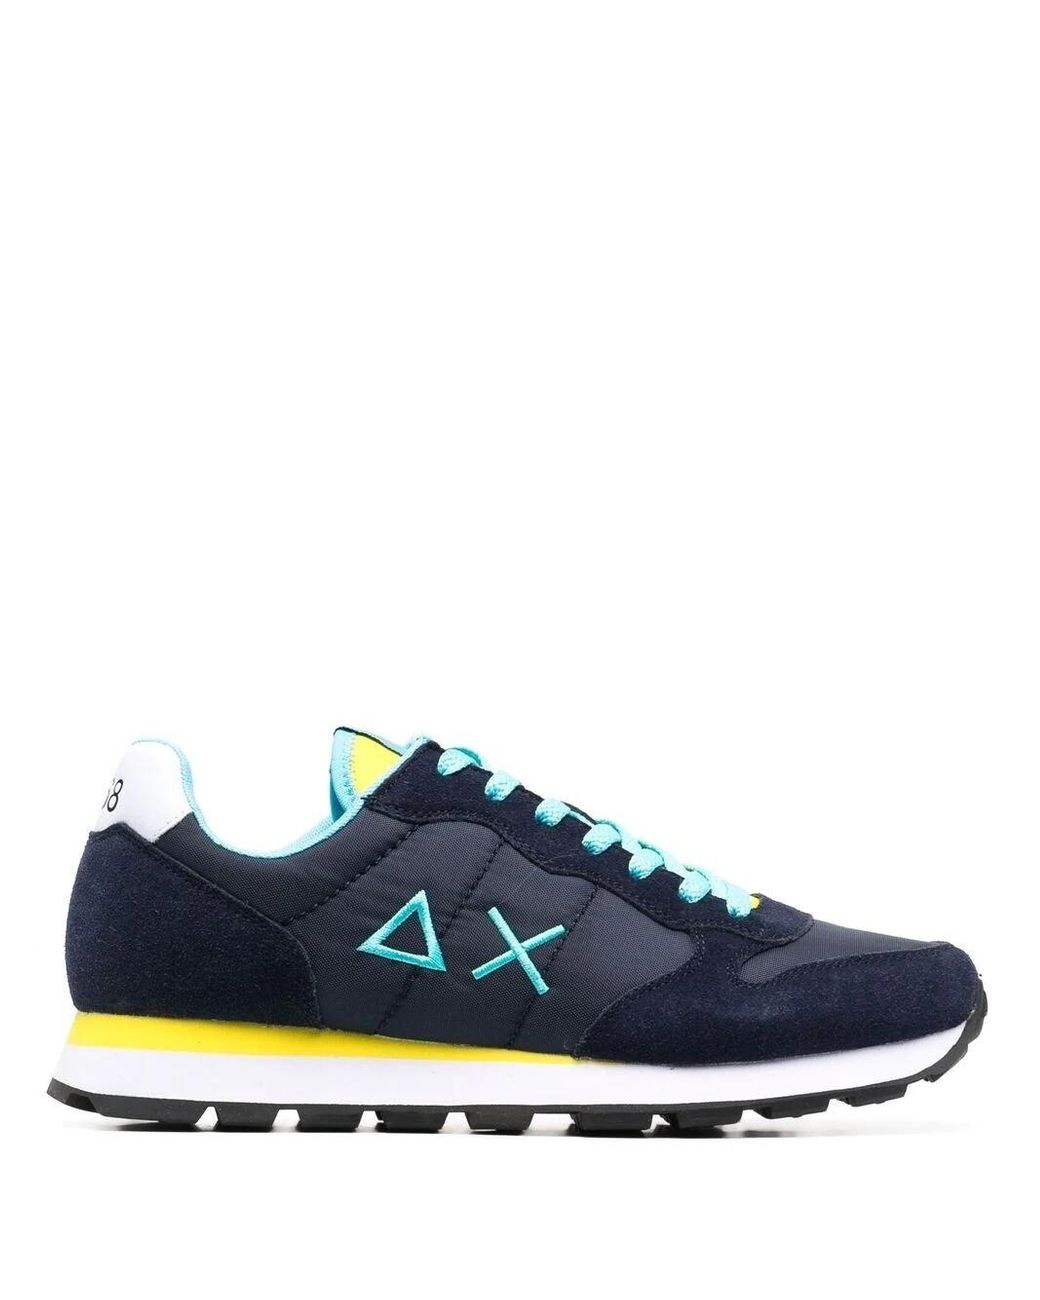 Sun 68 Rubber Logo Embroidery Sneakers in Blue for Men - Lyst